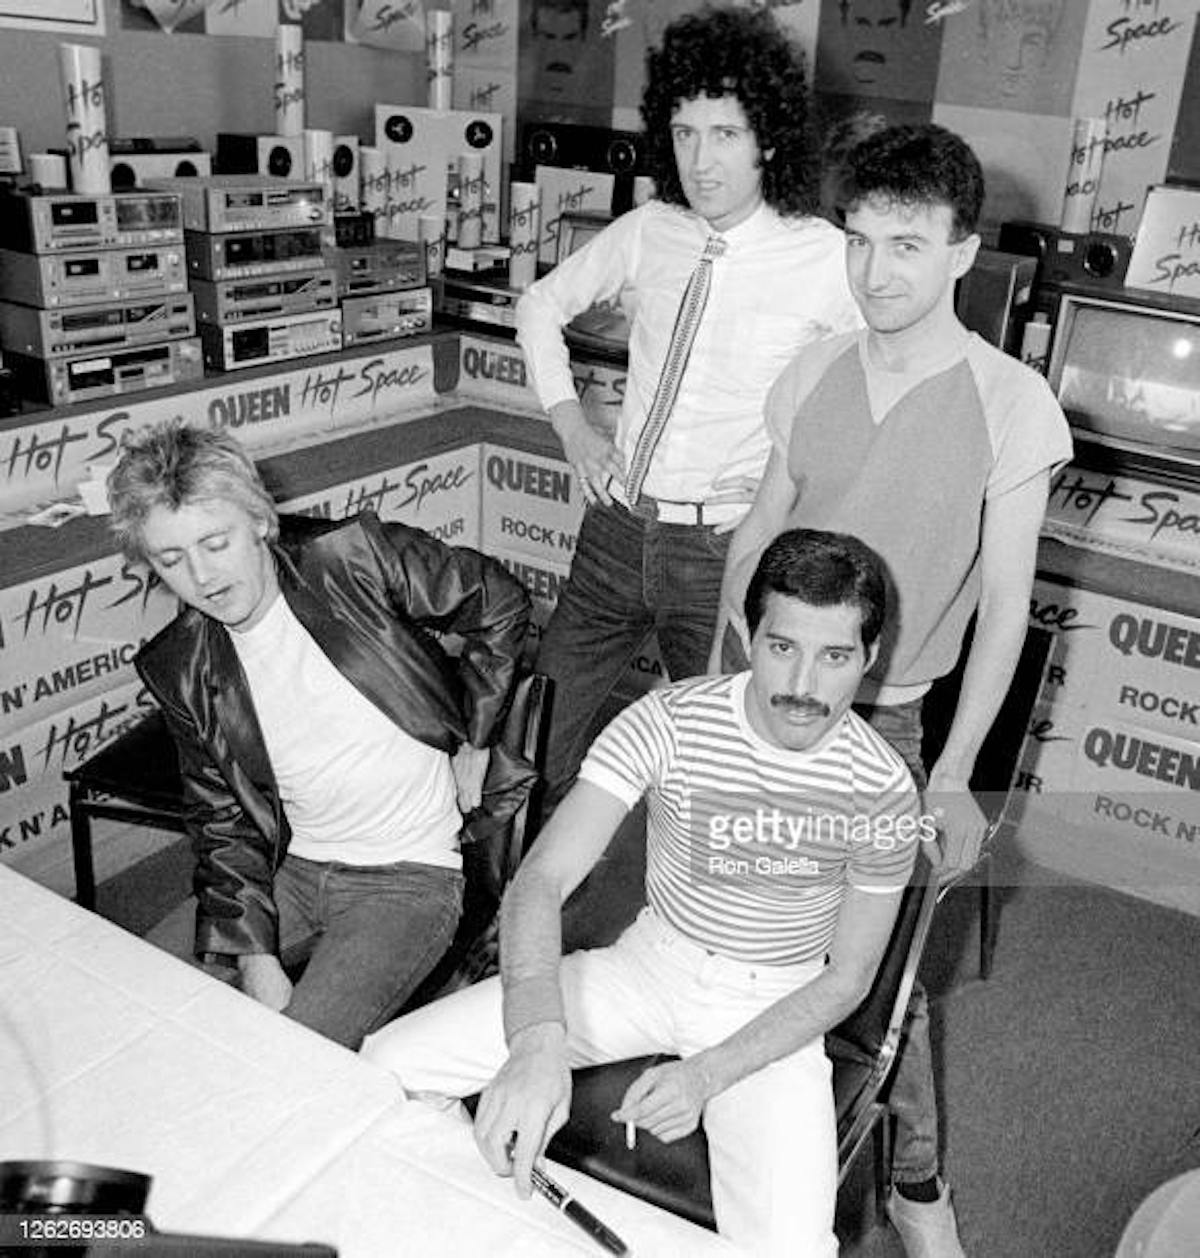 Roger Taylor, Brian May, John Deacon, and Freddie Mercury of Queen attend "Hot Space" Album Party at Crazy Eddie's in New York City on July 27, 1982. (Photo by Ron Galella/Ron Galella Collection via Getty Images)